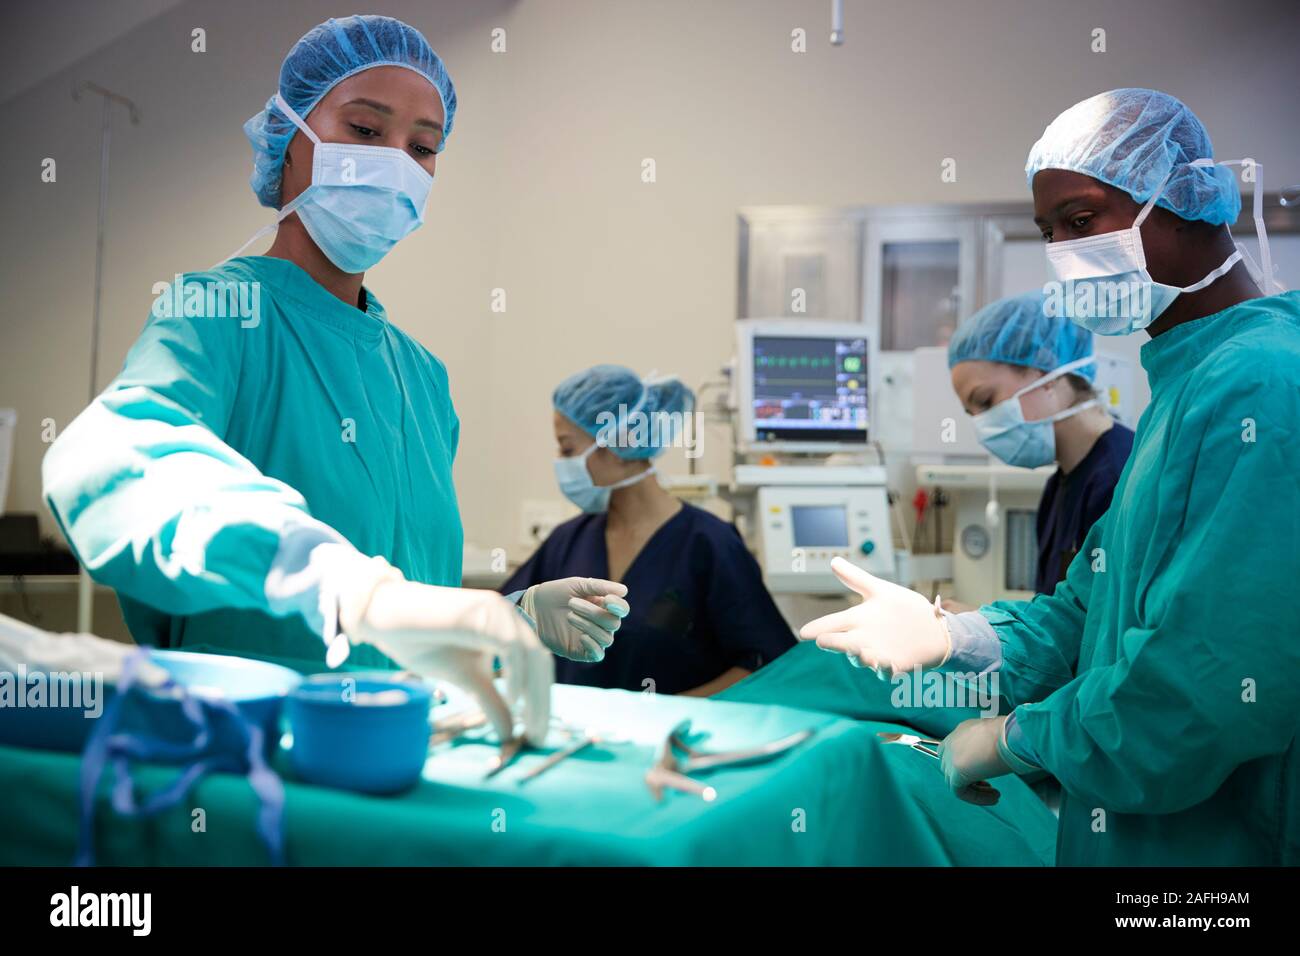 Surgical Team Working On Patient In Hospital Operating Theatre Stock Photo